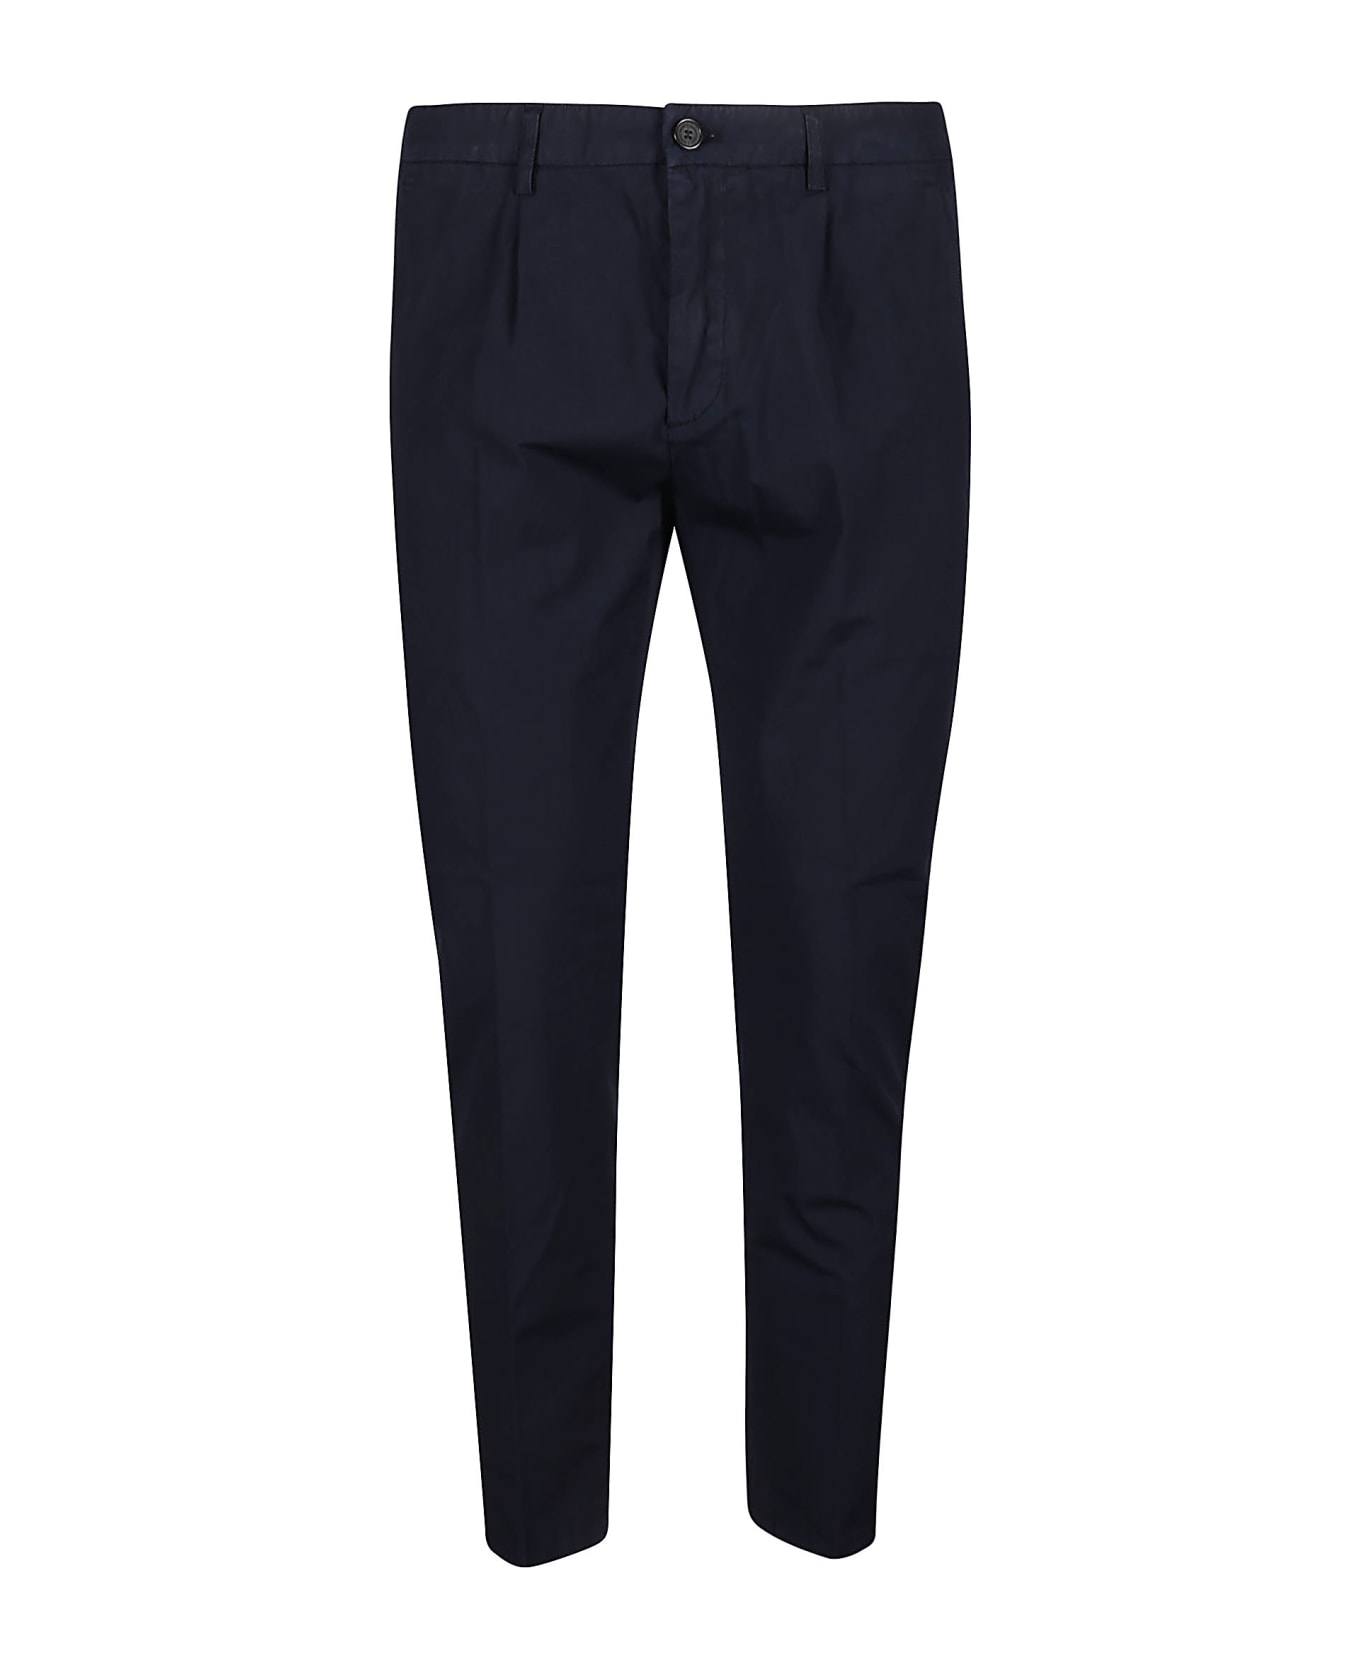 Department Five Prince Pences Chinos Pant - Navy